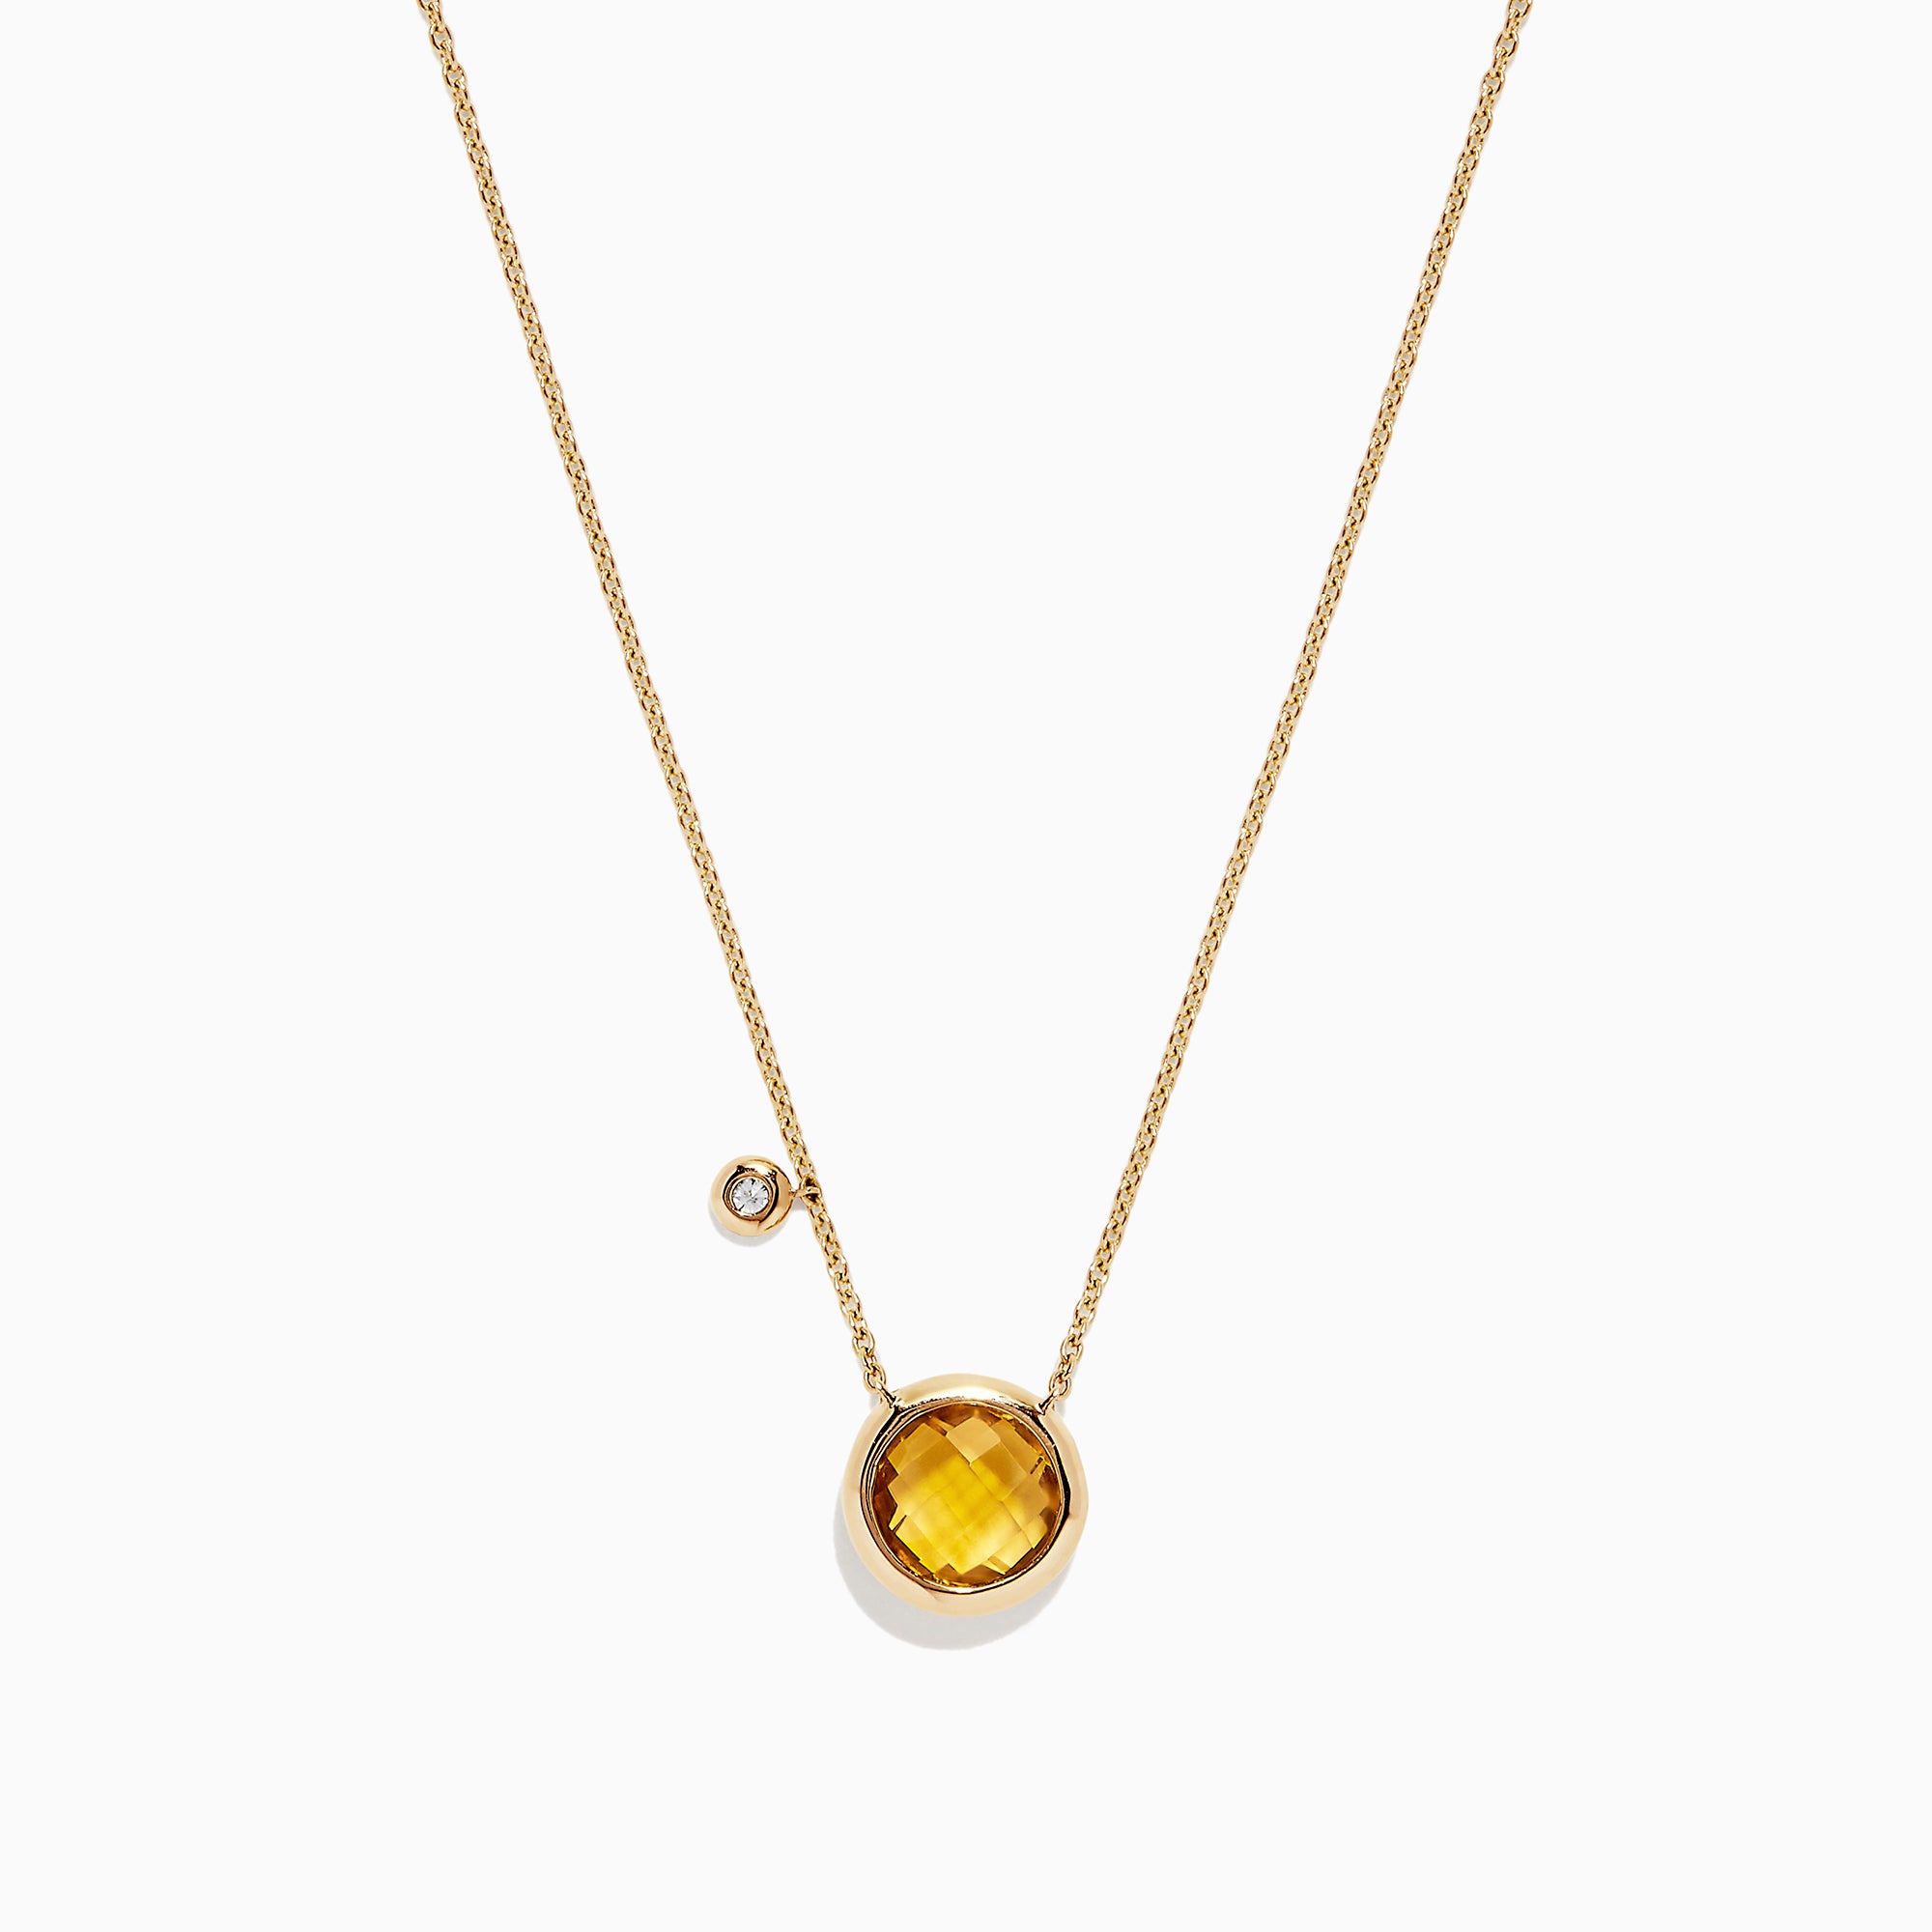 14 Karat Yellow Gold Citrine Necklace Measuring 16 Inches - 001-235-13000131